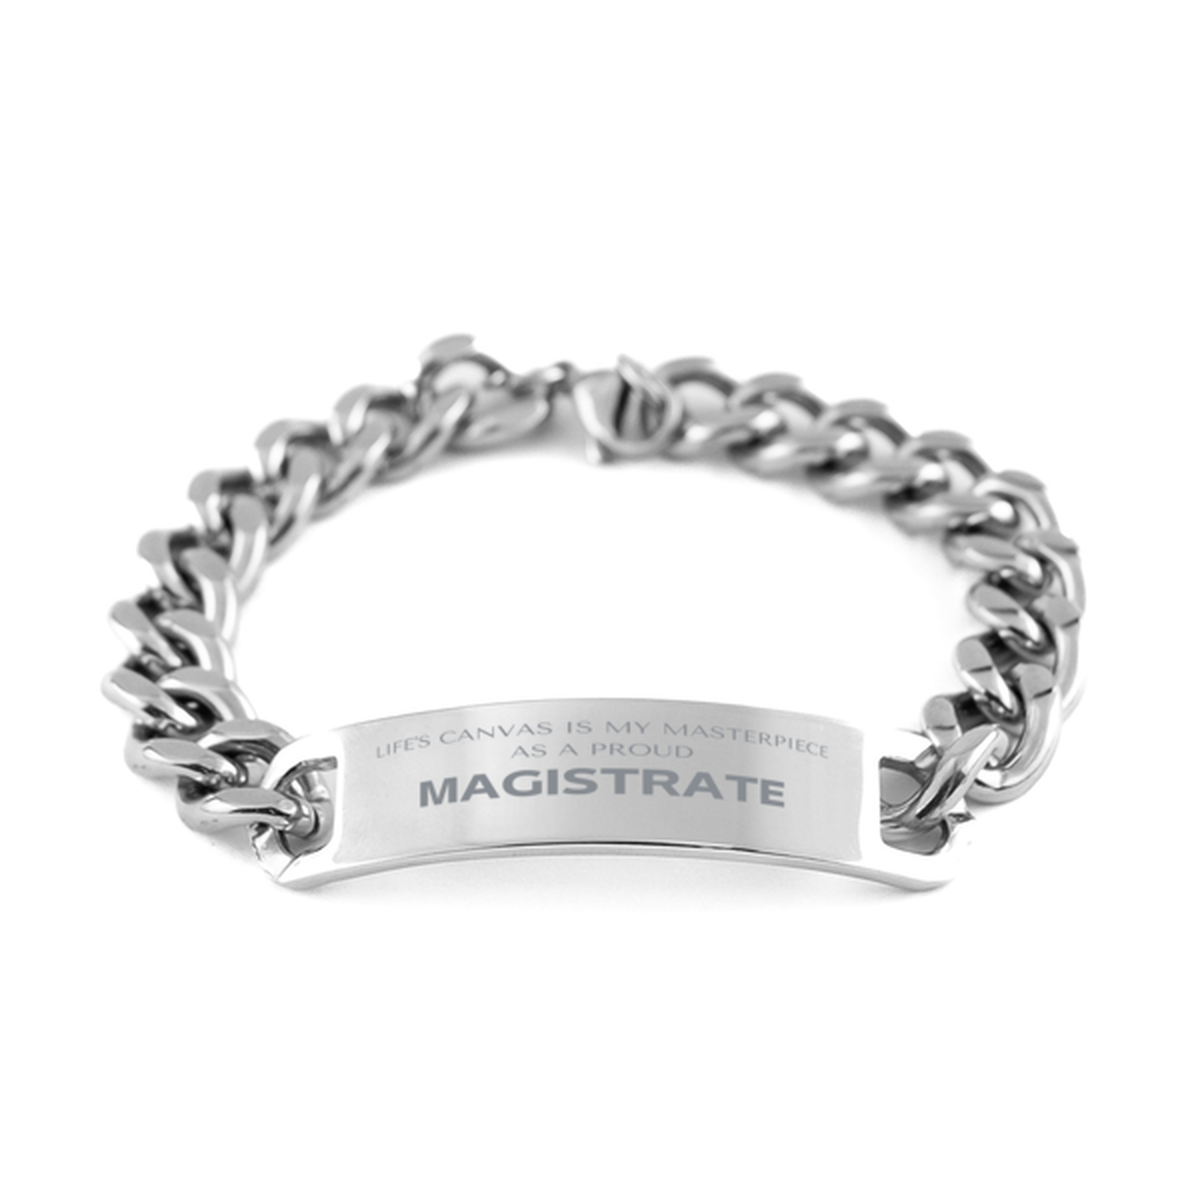 Proud Magistrate Gifts, Life's canvas is my masterpiece, Epic Birthday Christmas Unique Cuban Chain Stainless Steel Bracelet For Magistrate, Coworkers, Men, Women, Friends